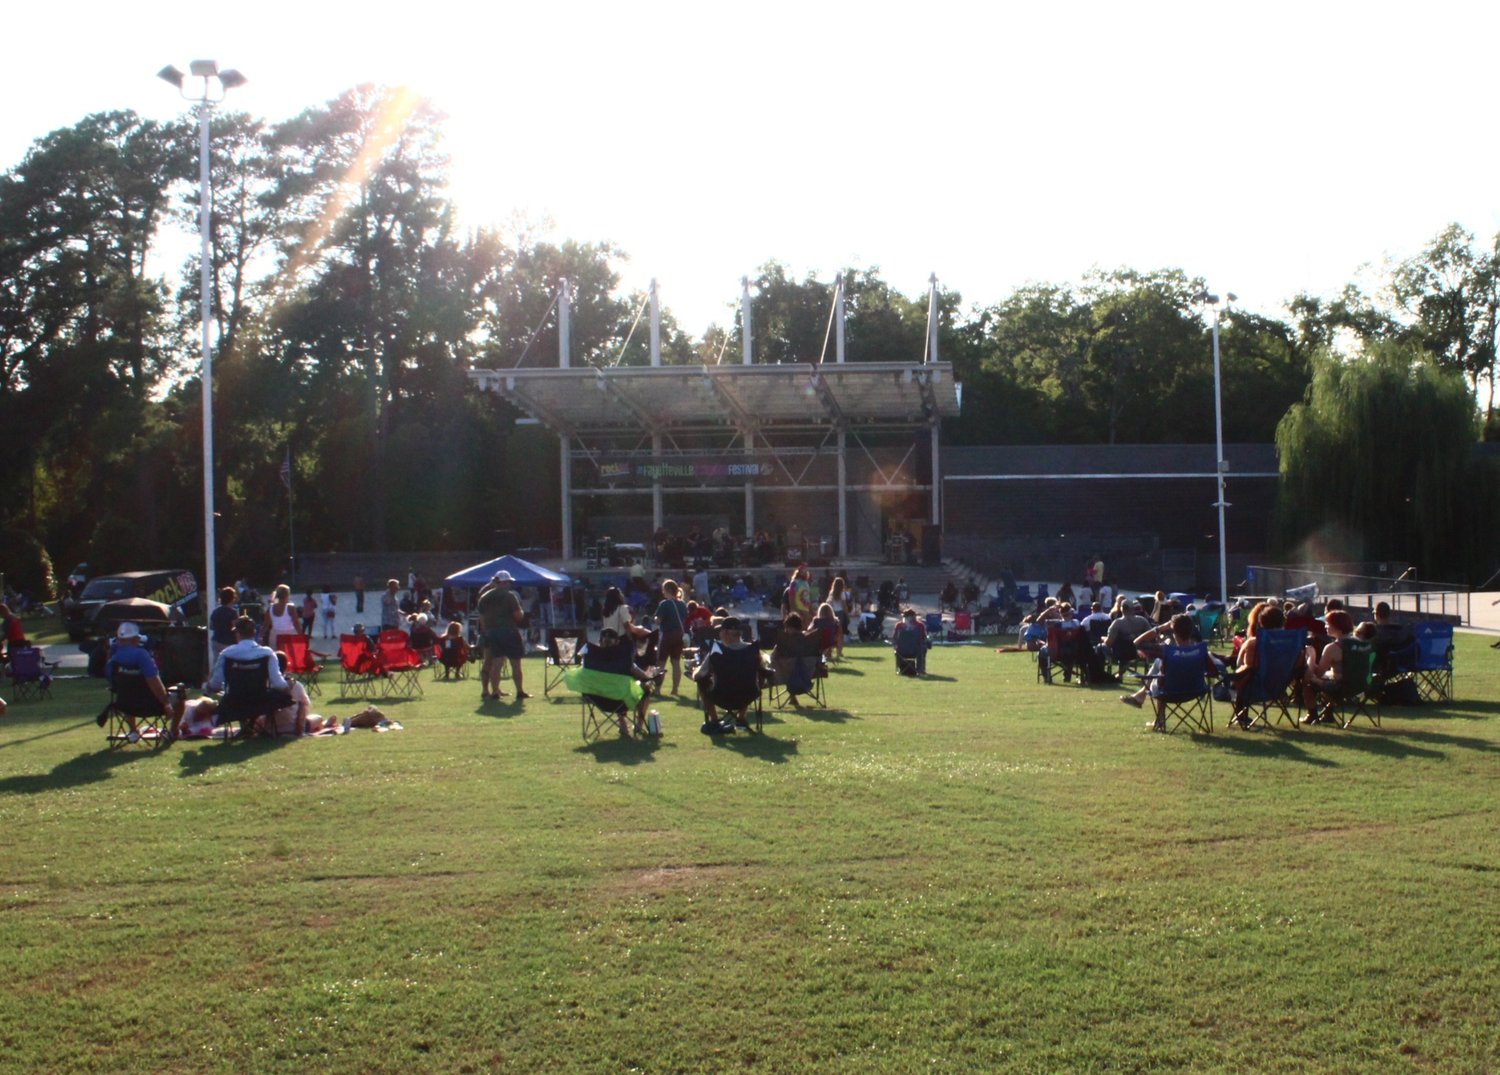 Attendees gather at Festival Park during Fayetteville After Five.